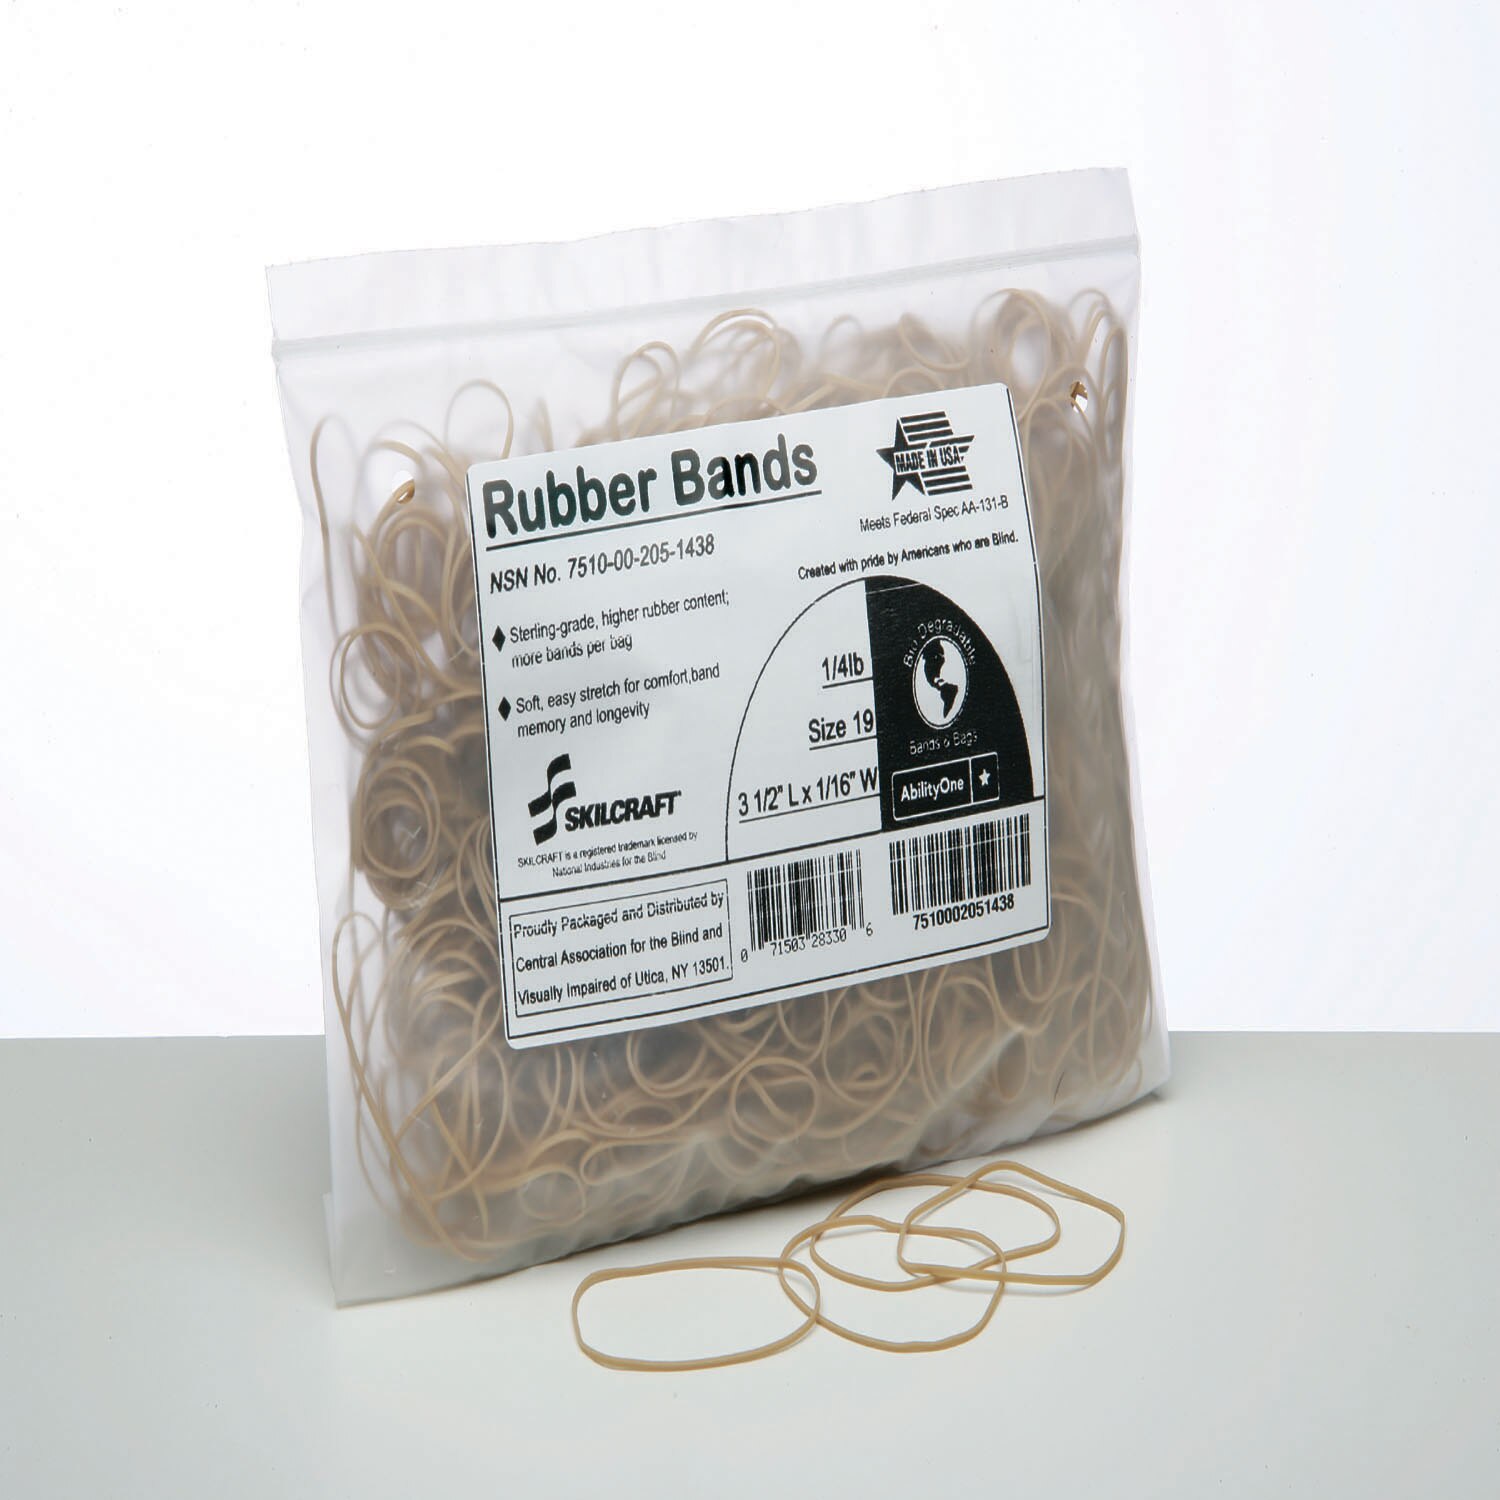 Rubber Band, Sterling Grade, Size 19, 1/4 lb